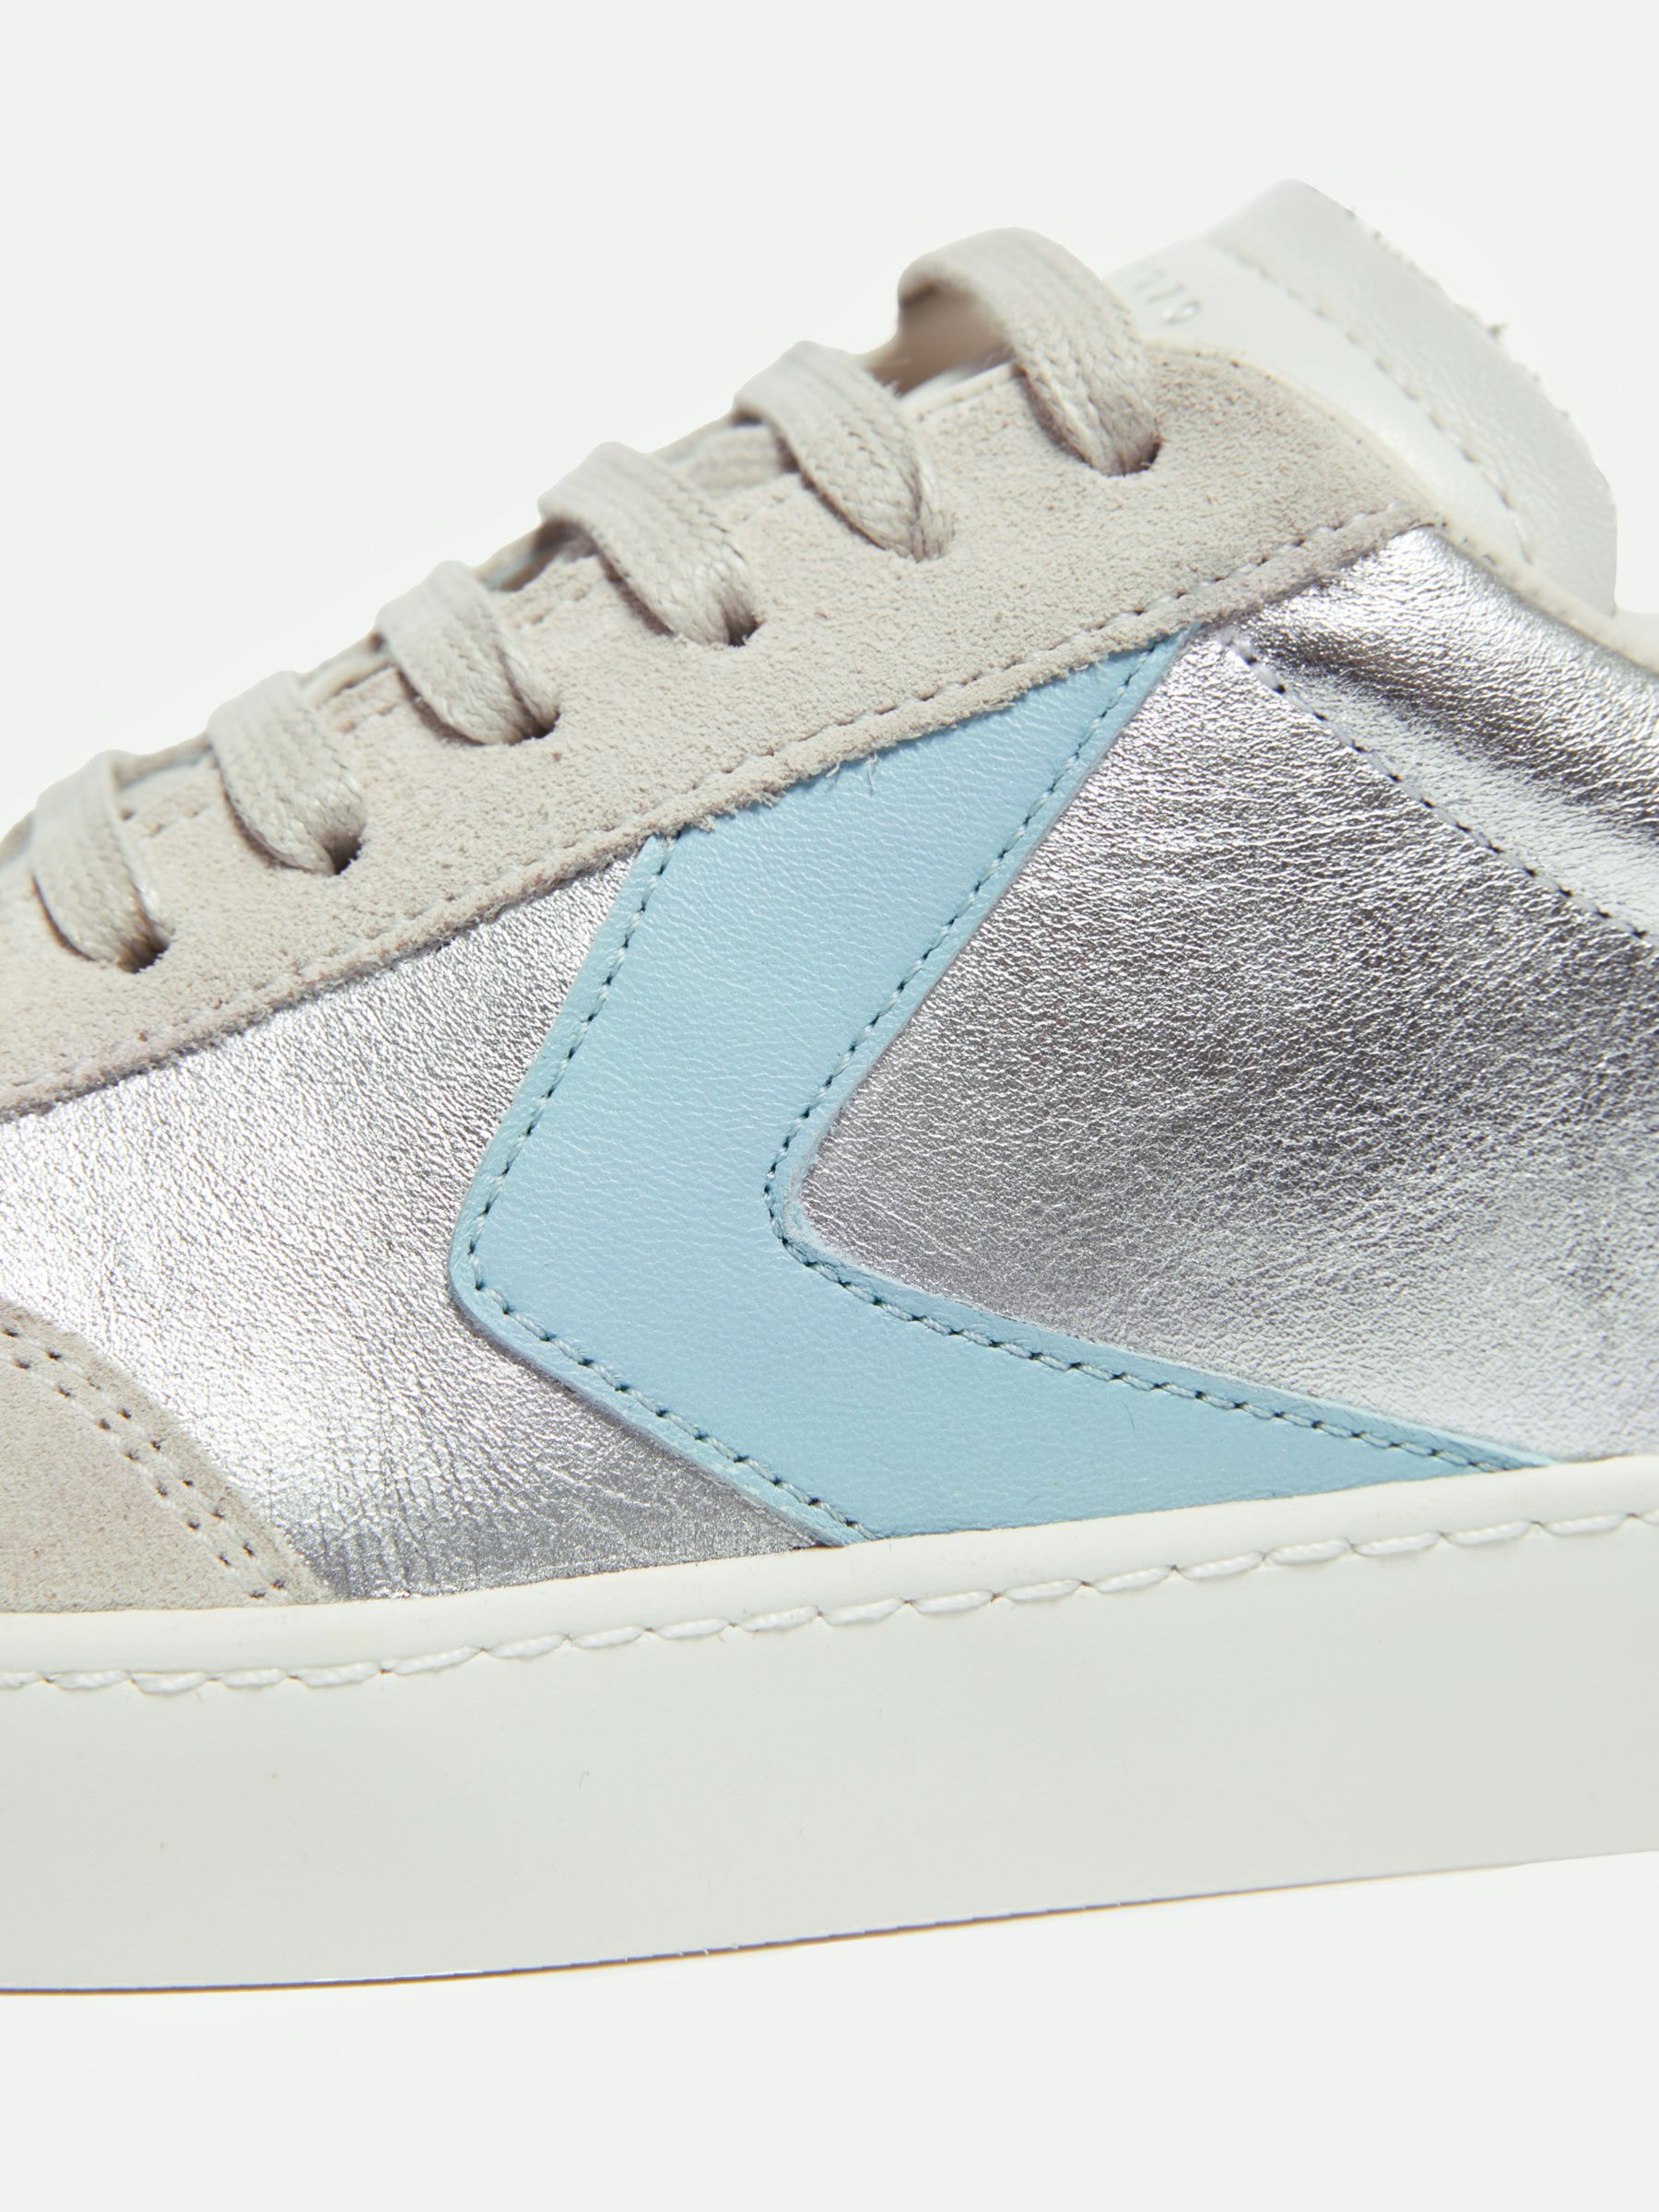 Buy Jigsaw Classic Low Top Leather Trainers, Silver Online at johnlewis.com